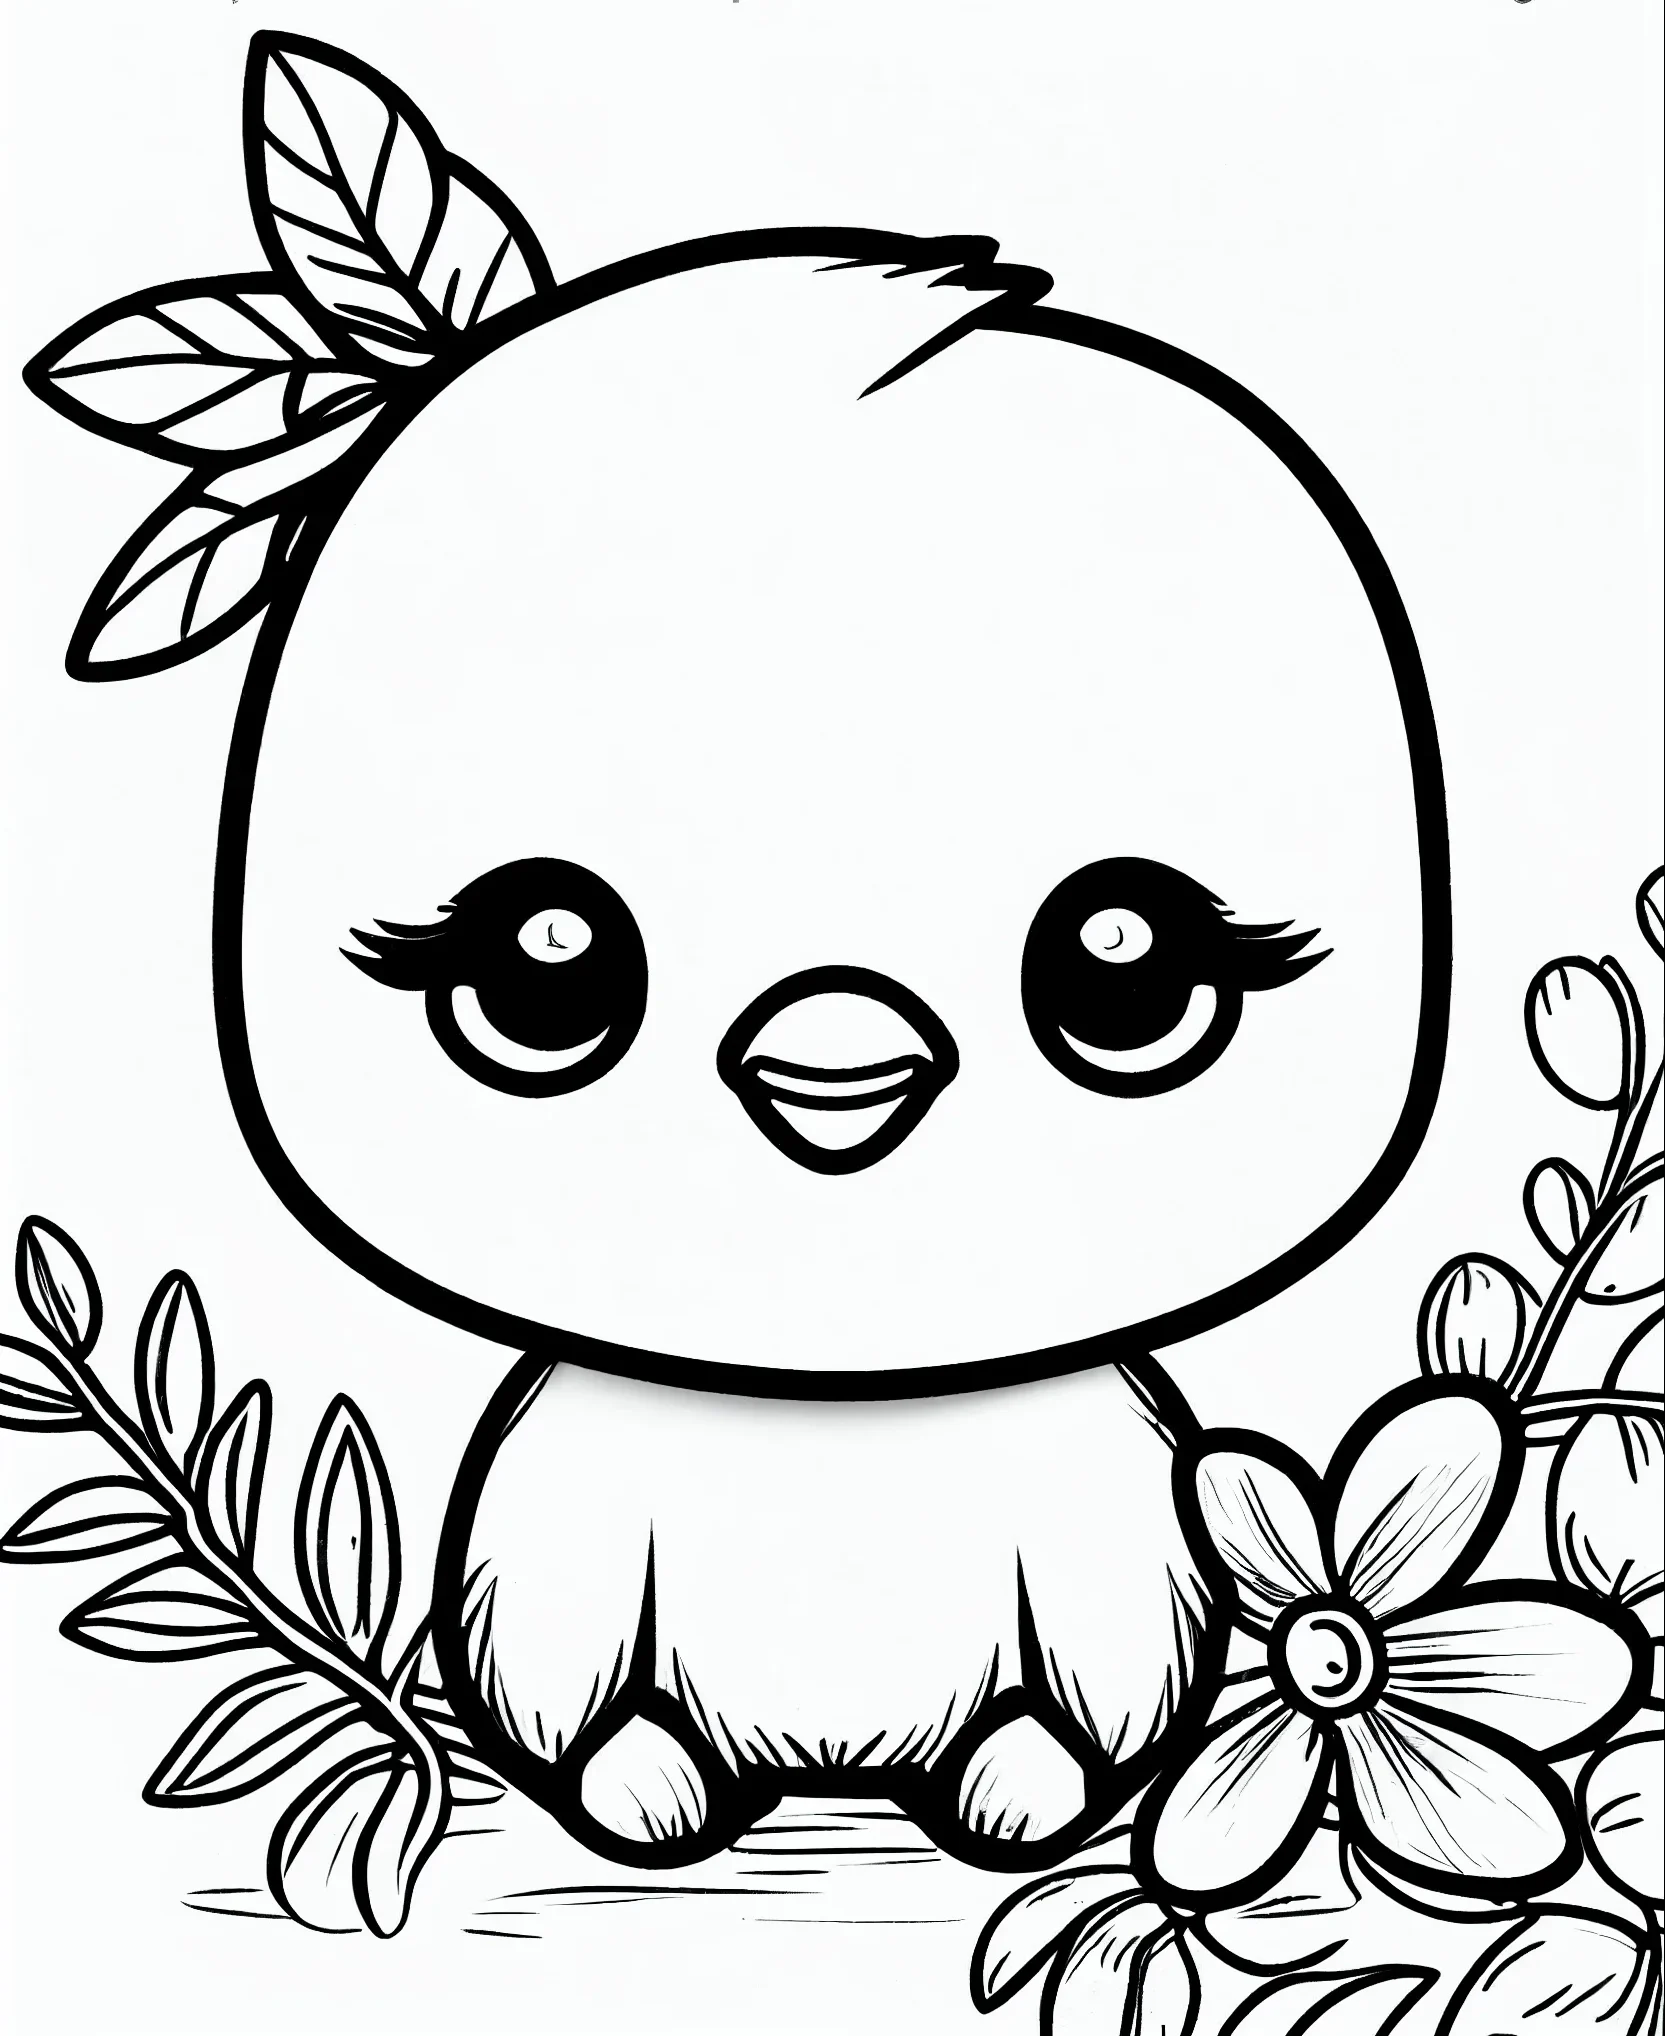 Printable easy cute coloring pages